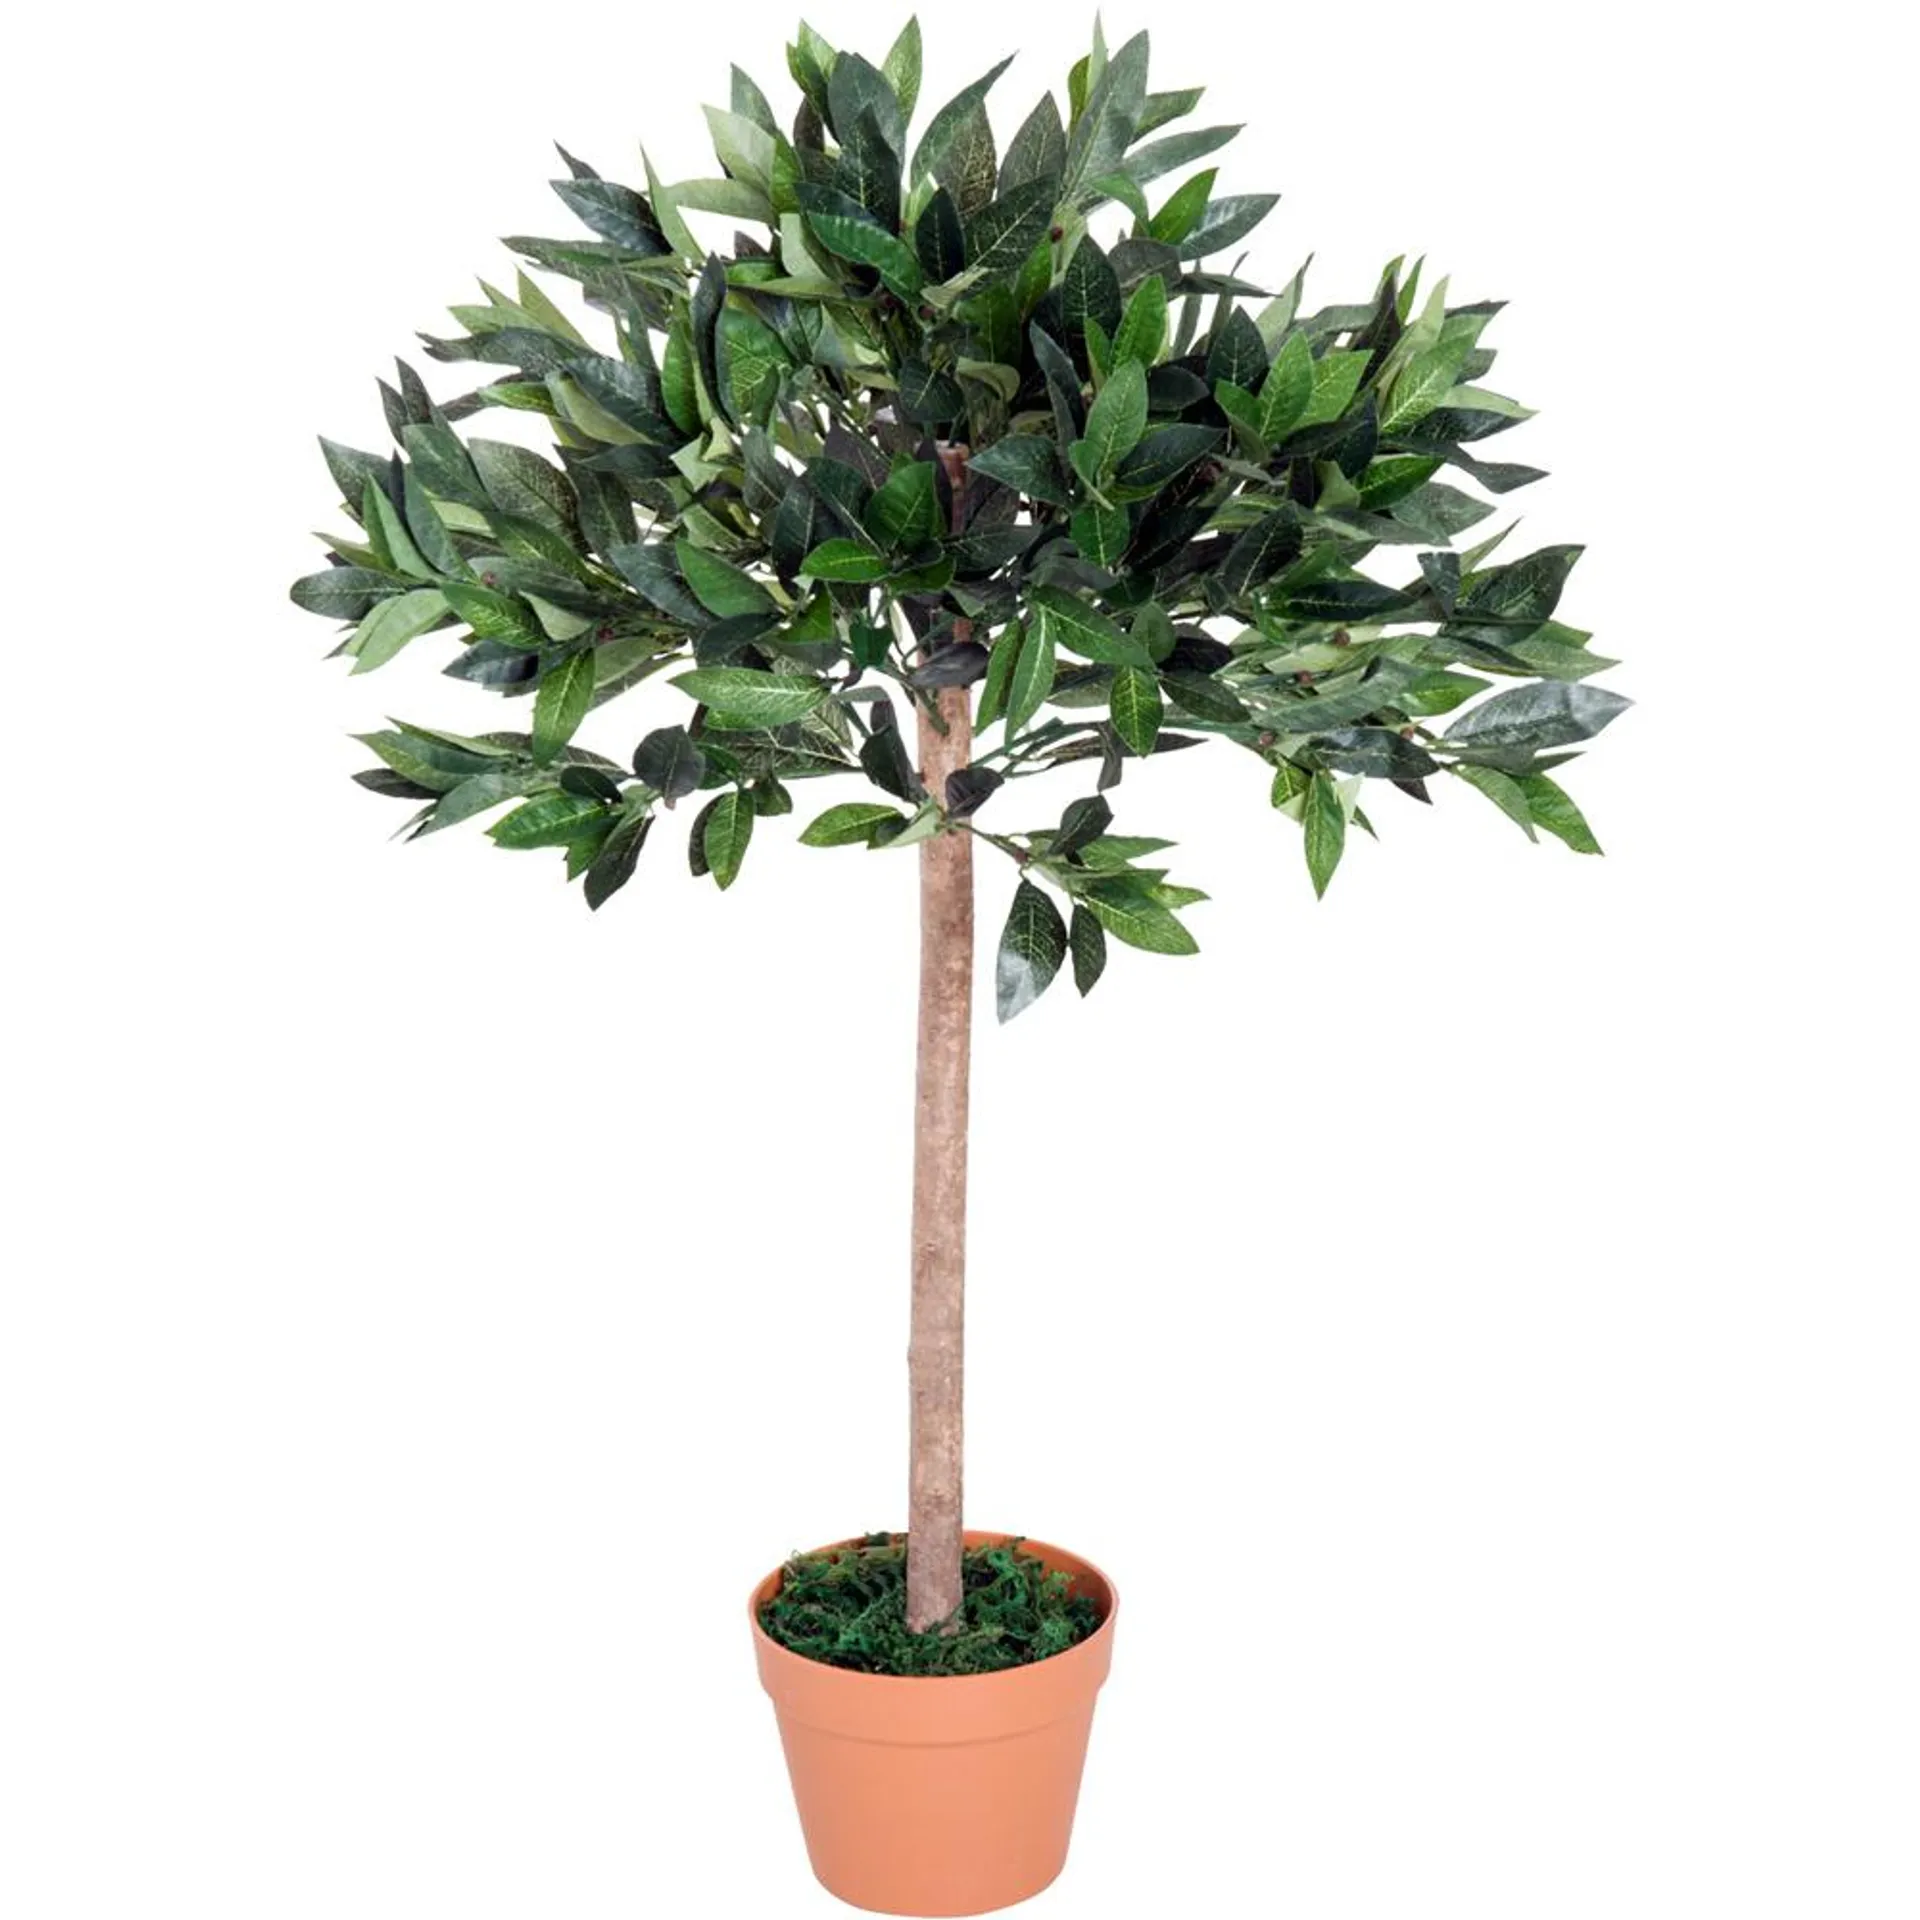 Outsunny Olive Tree Artificial Plant In Pot 3ft